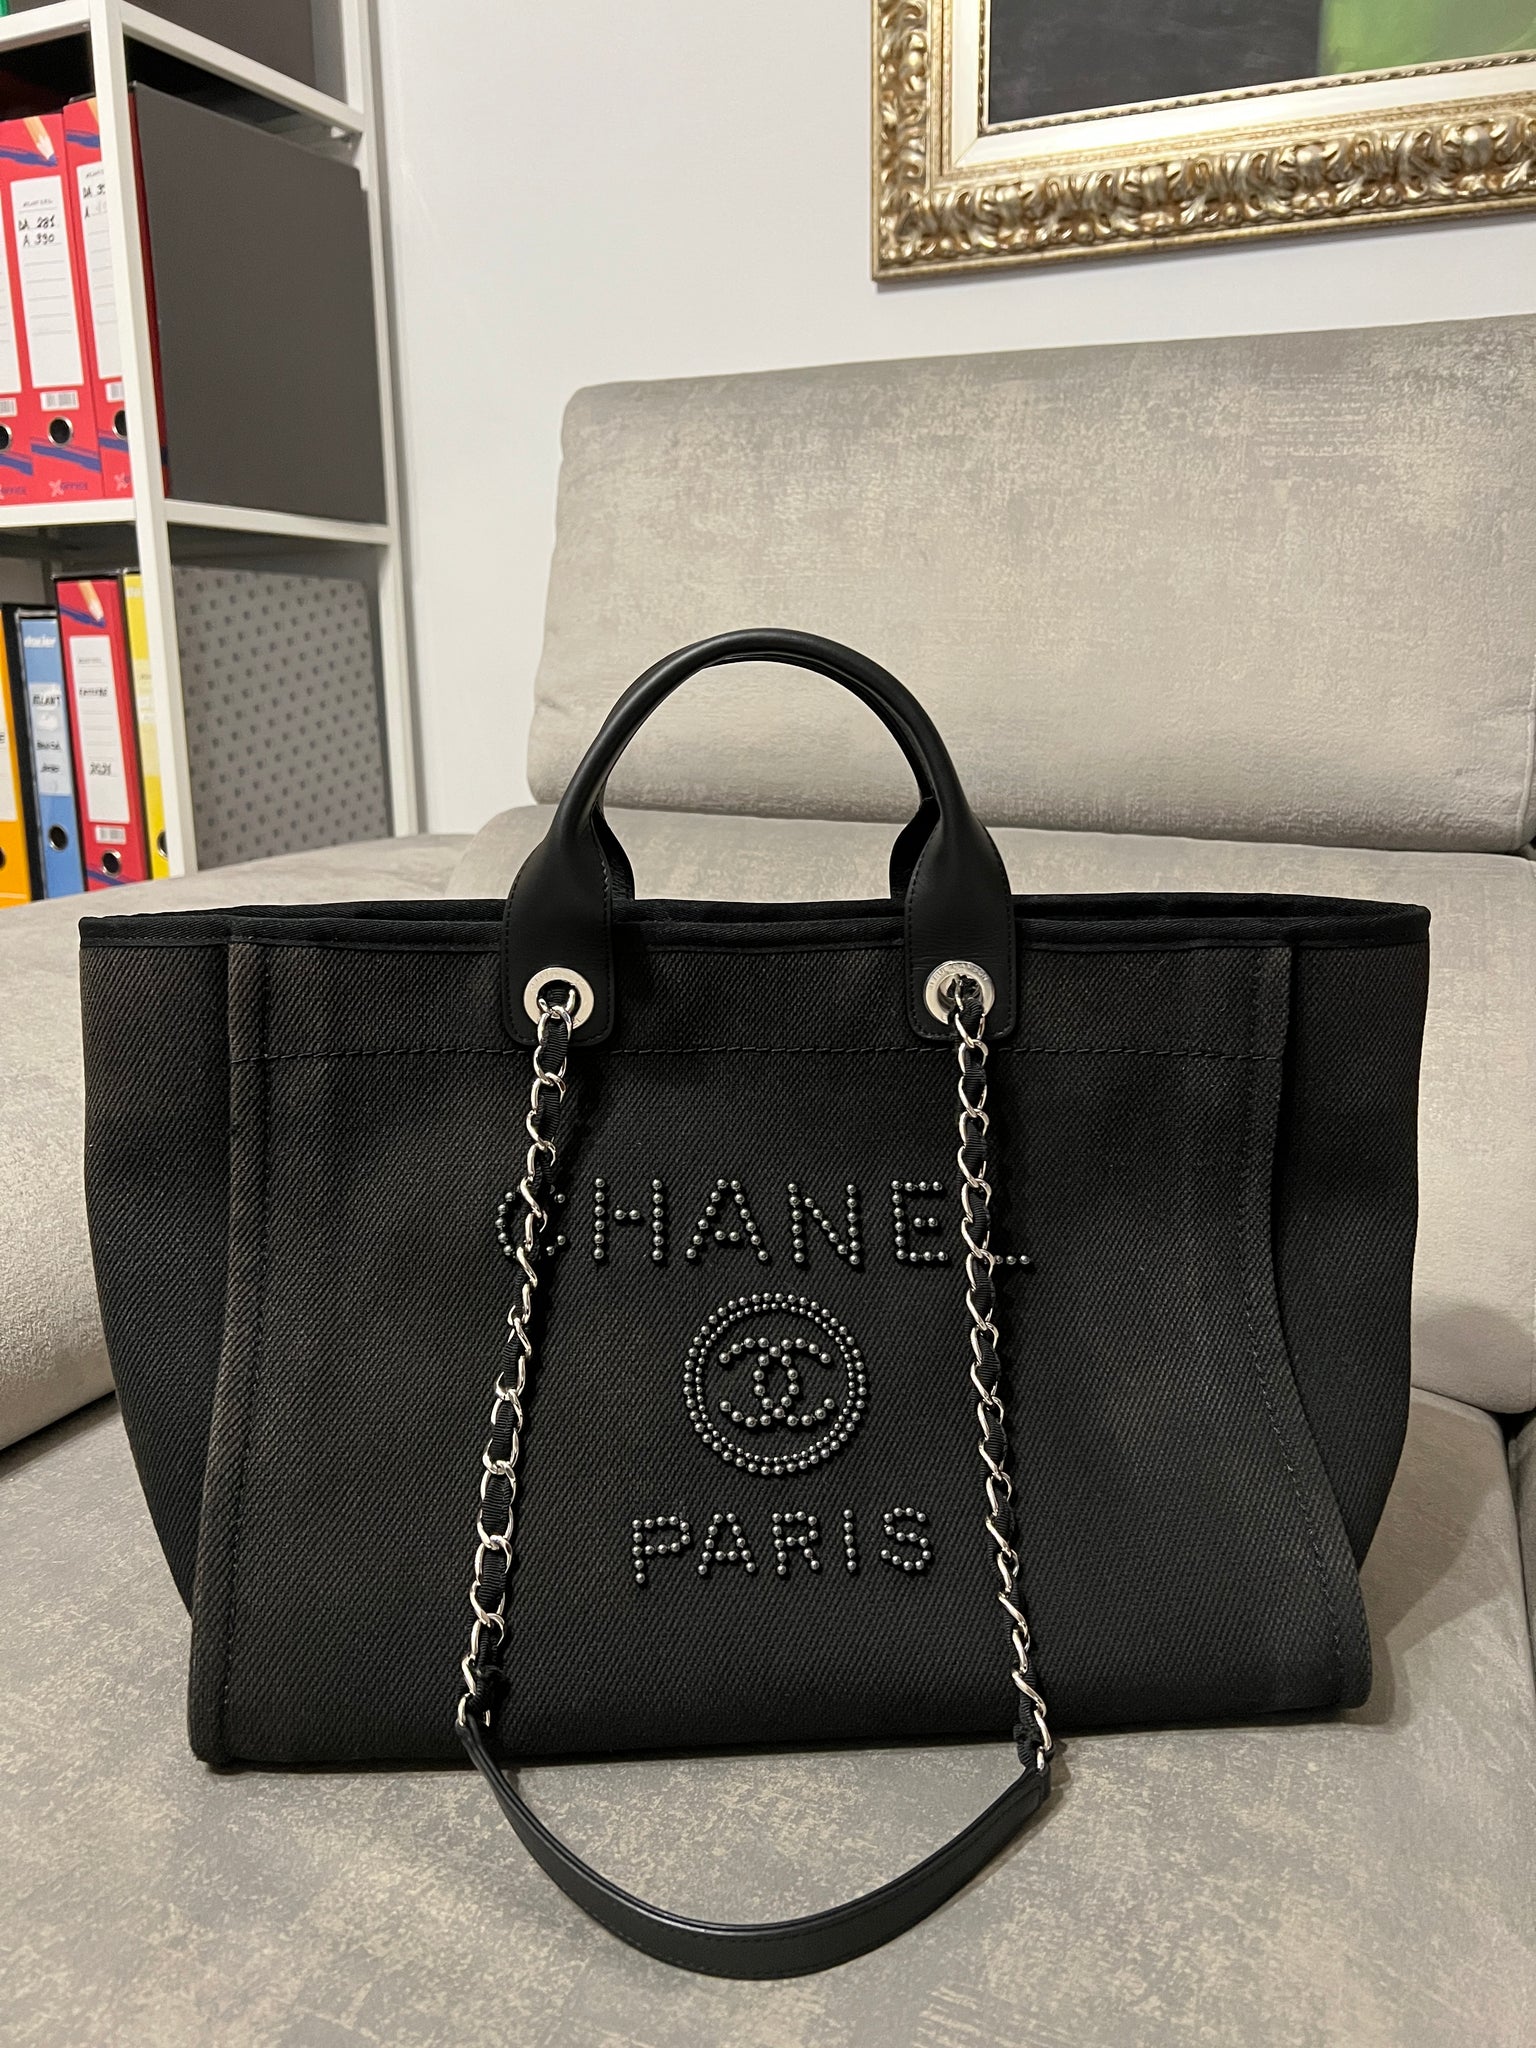 Chanel Medium Deauville Tote Bag NEW 2020